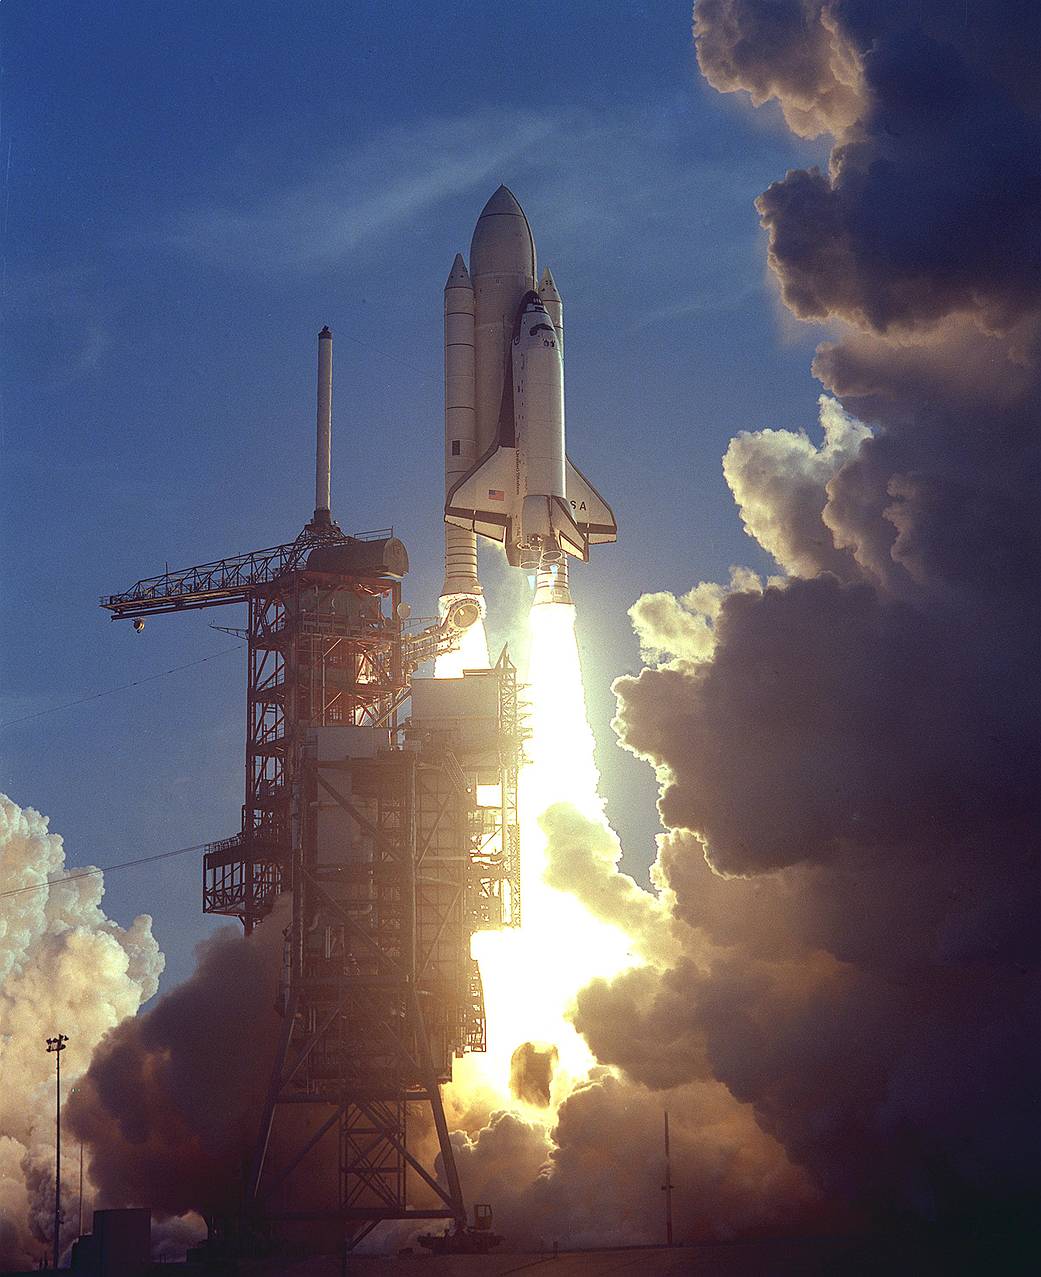 This week in 1981, space shuttle Columbia and STS-1 lifted off from NASA’s Kennedy Space Center.